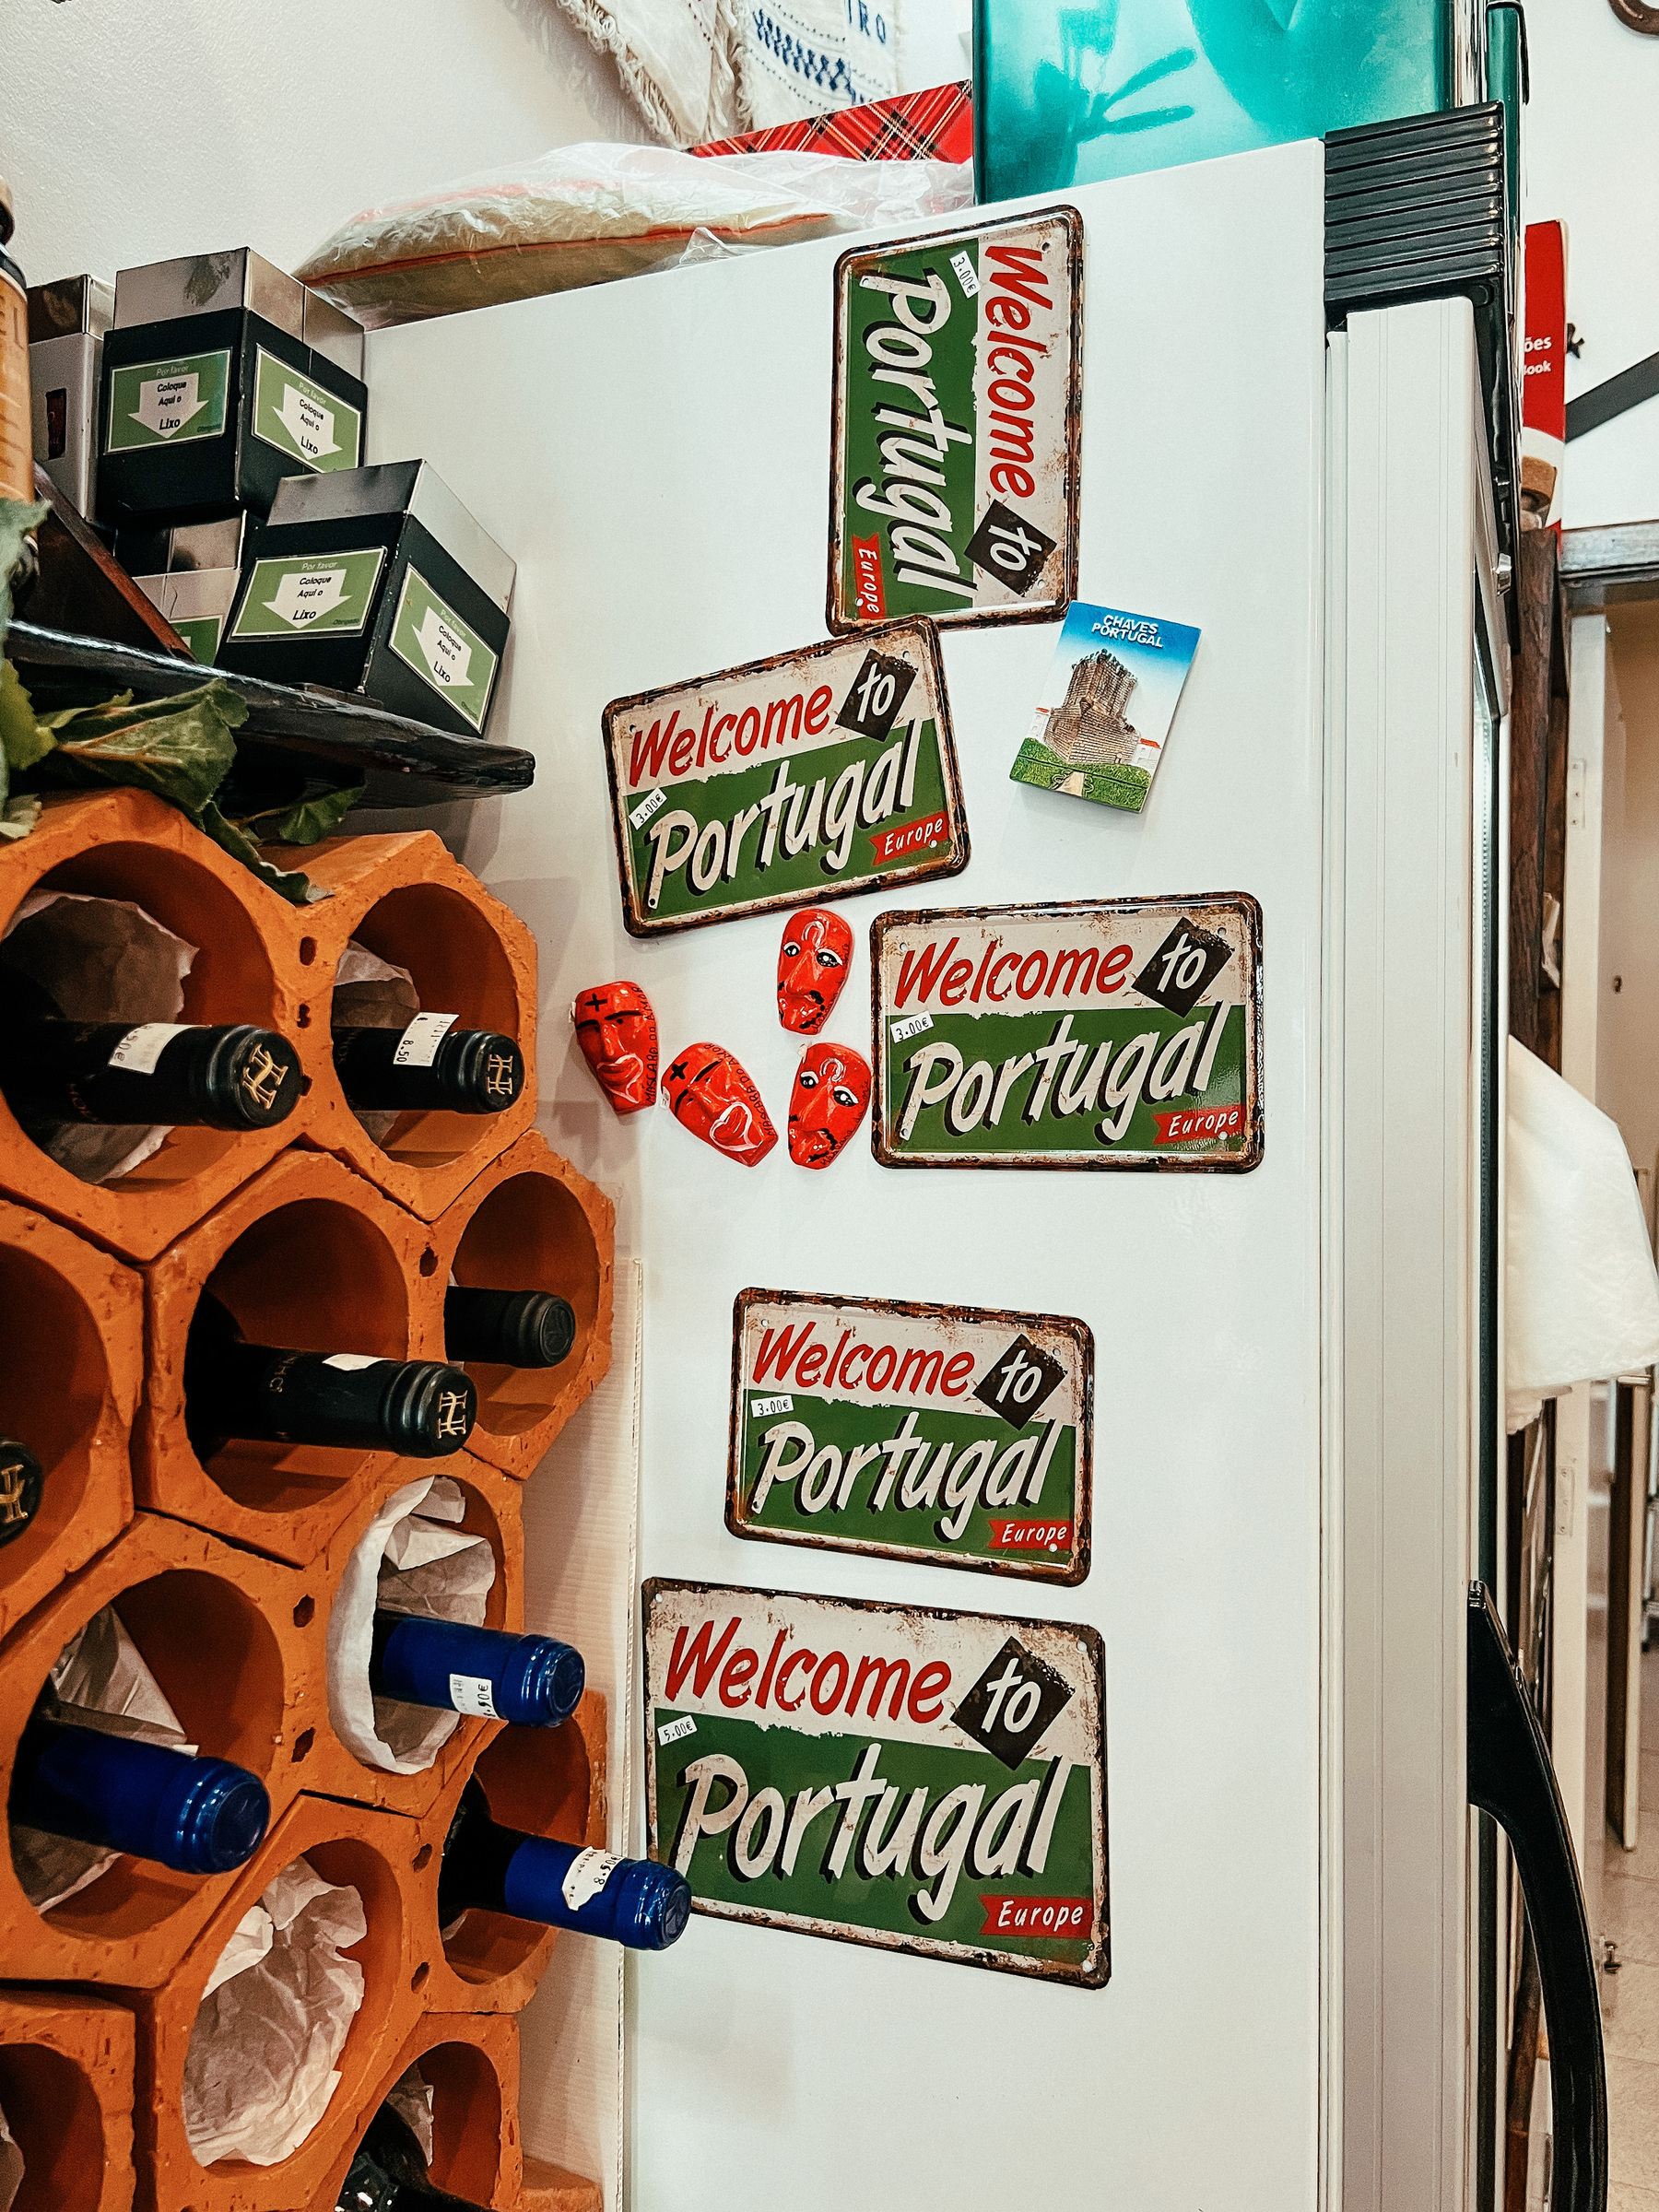 Bottles and a fridge. The fridge has magnets with the words “Welcome to Portugal”. 